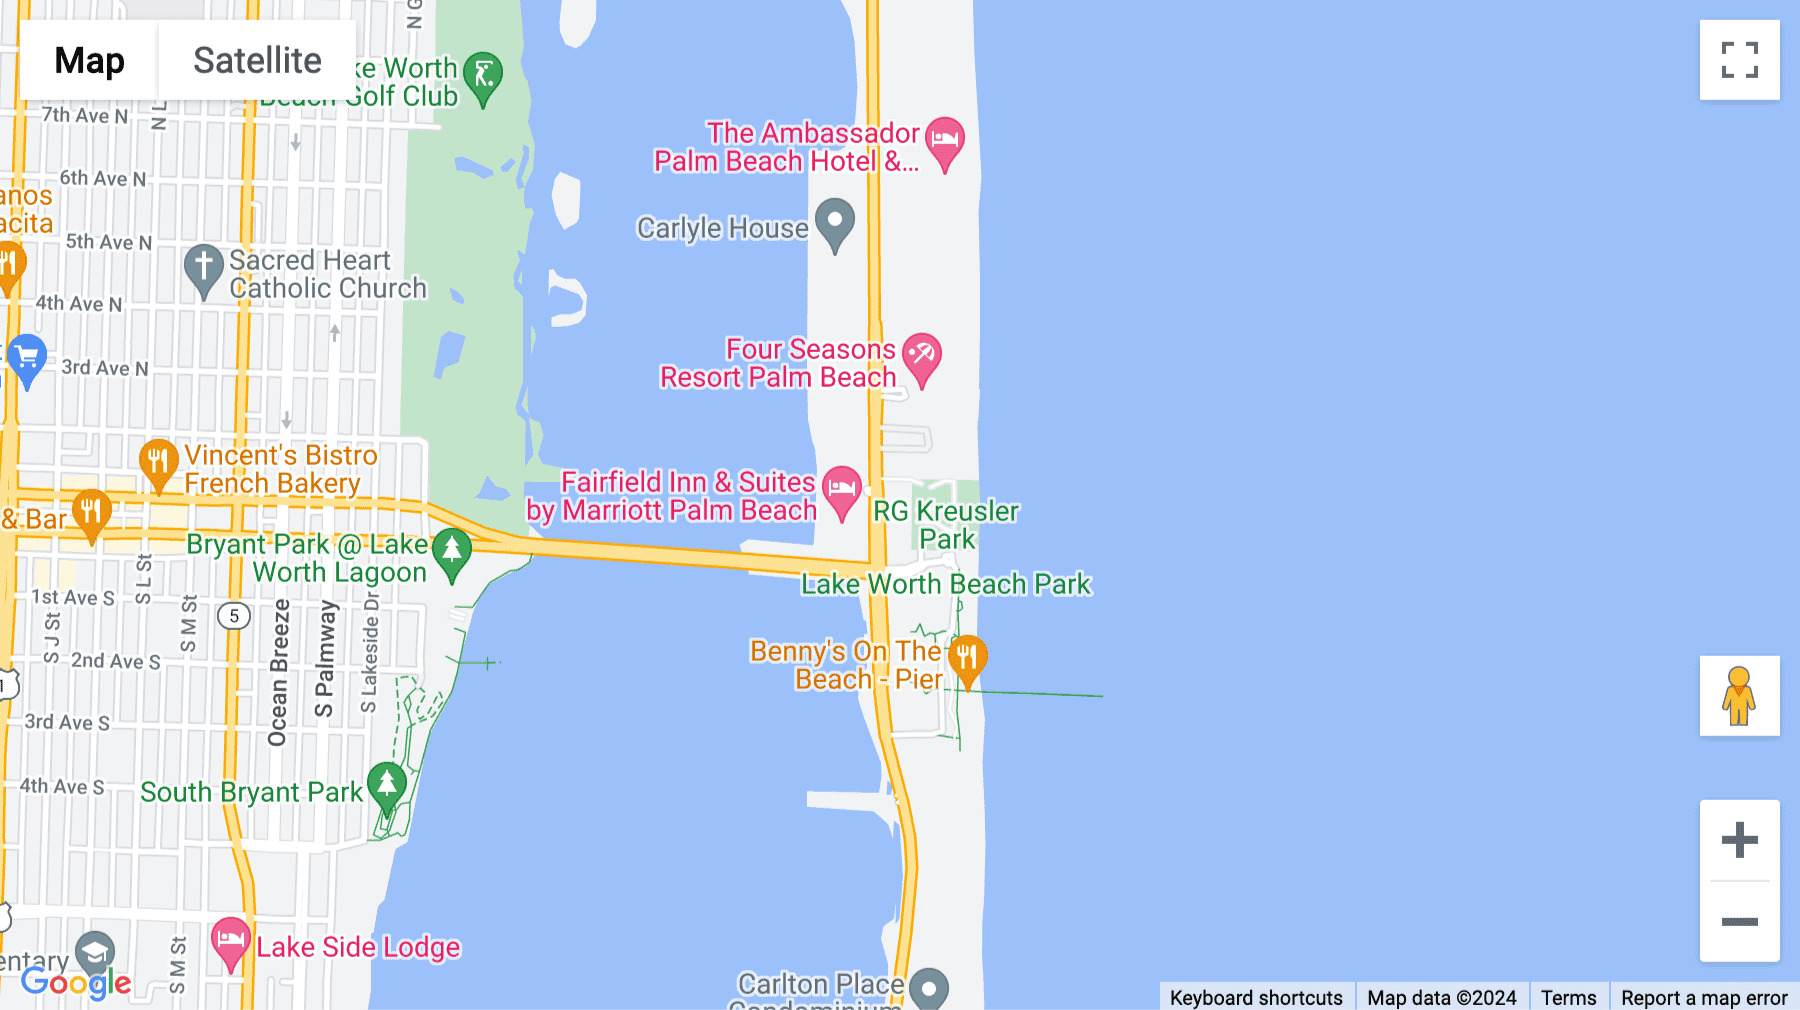 Click for interative map of 2875 South Ocean Blvd, Suite 200, Palm Beach